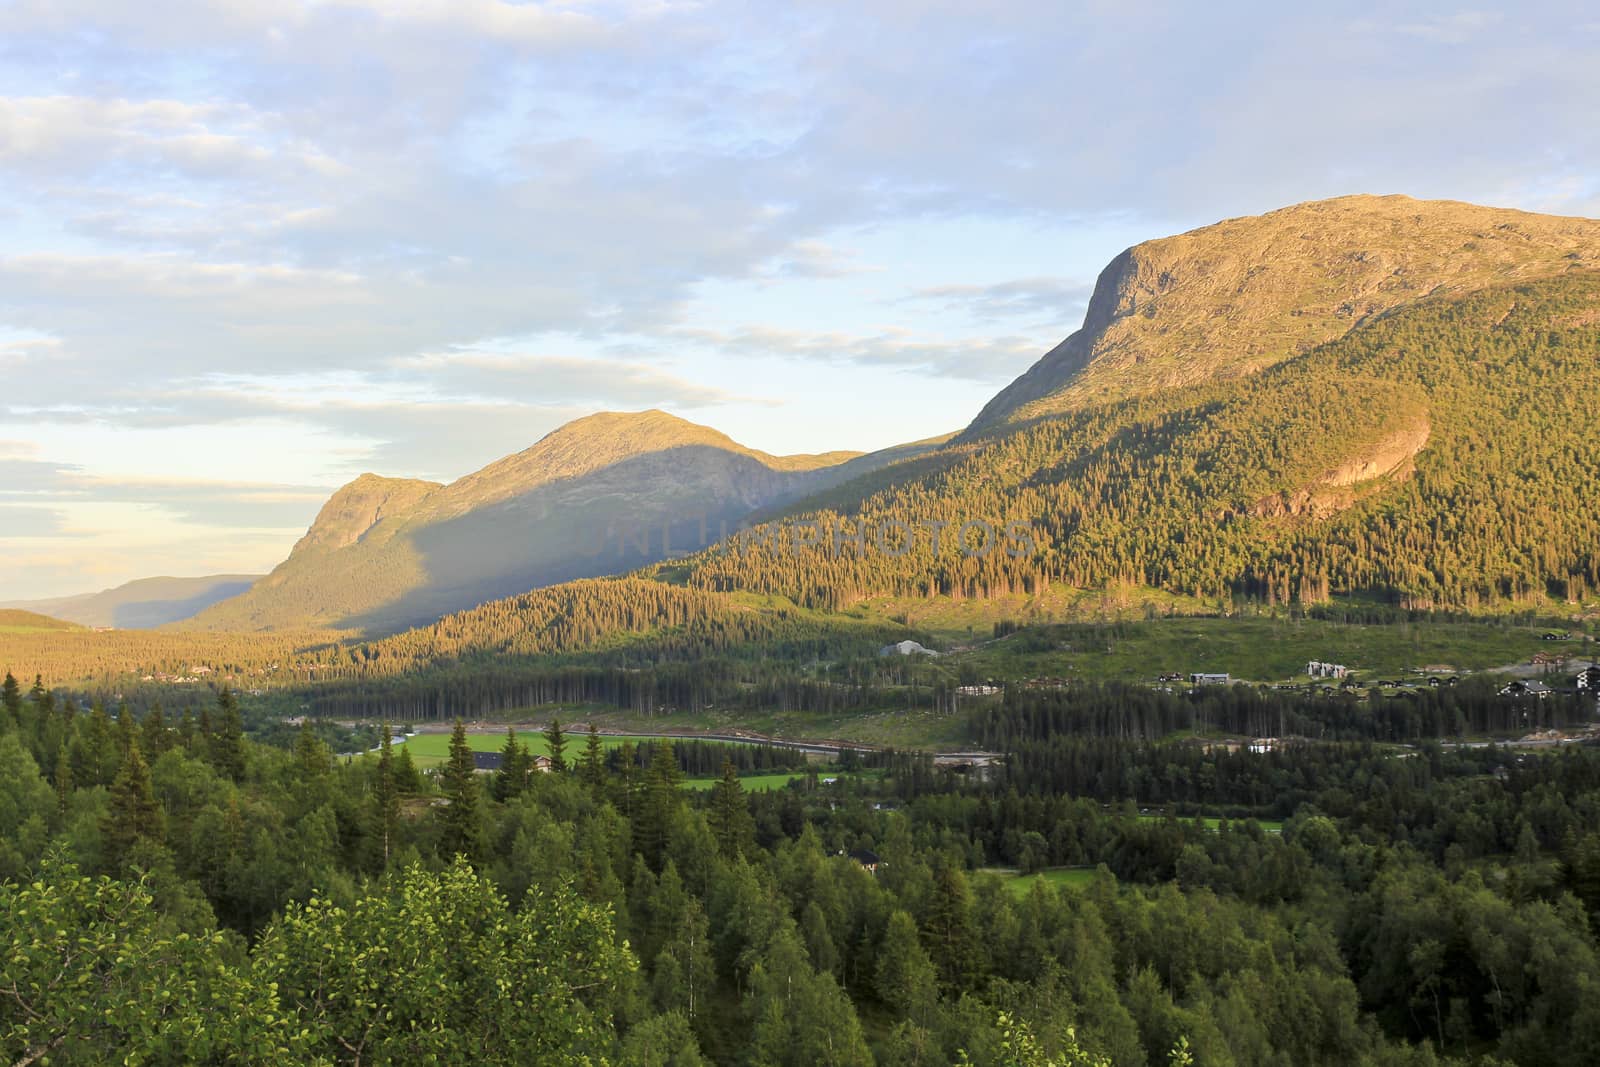 Spectacular landscape with mountains and valleys, Hemsedal, Buskerud, Norway. by Arkadij